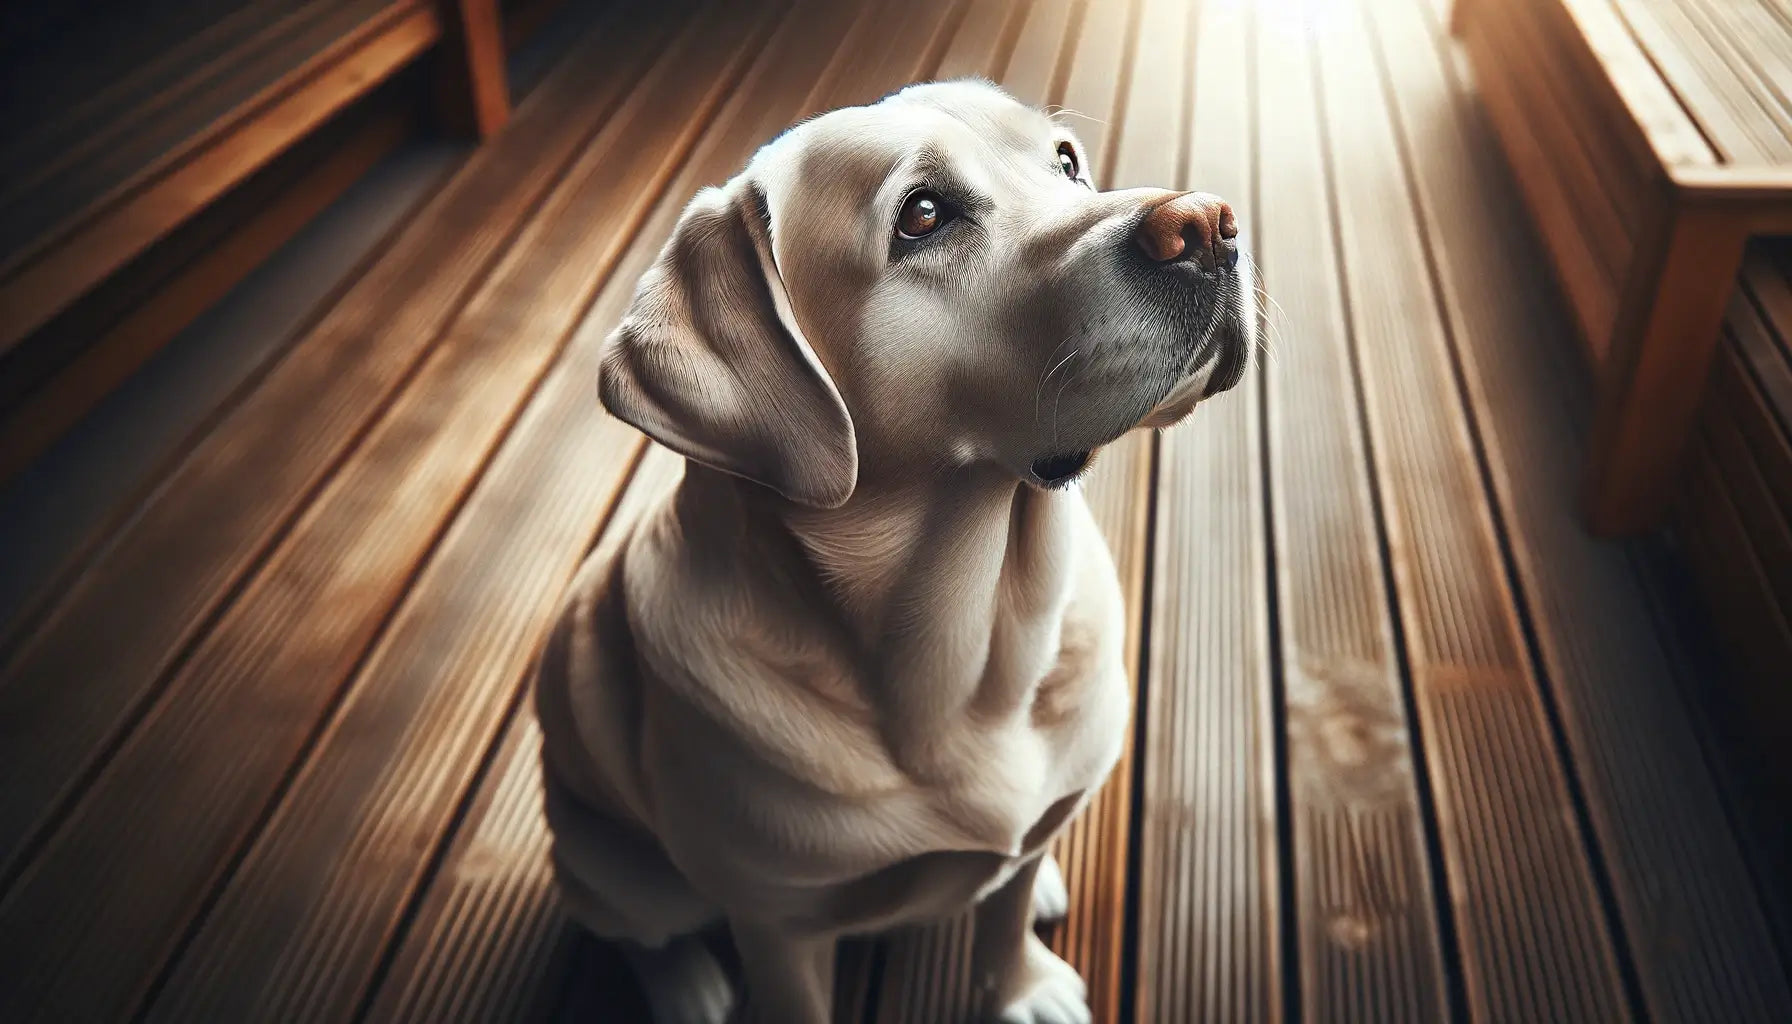 A Silver Lab looking upwards with a gentle and attentive expression, seated on what appears to be a wooden deck.